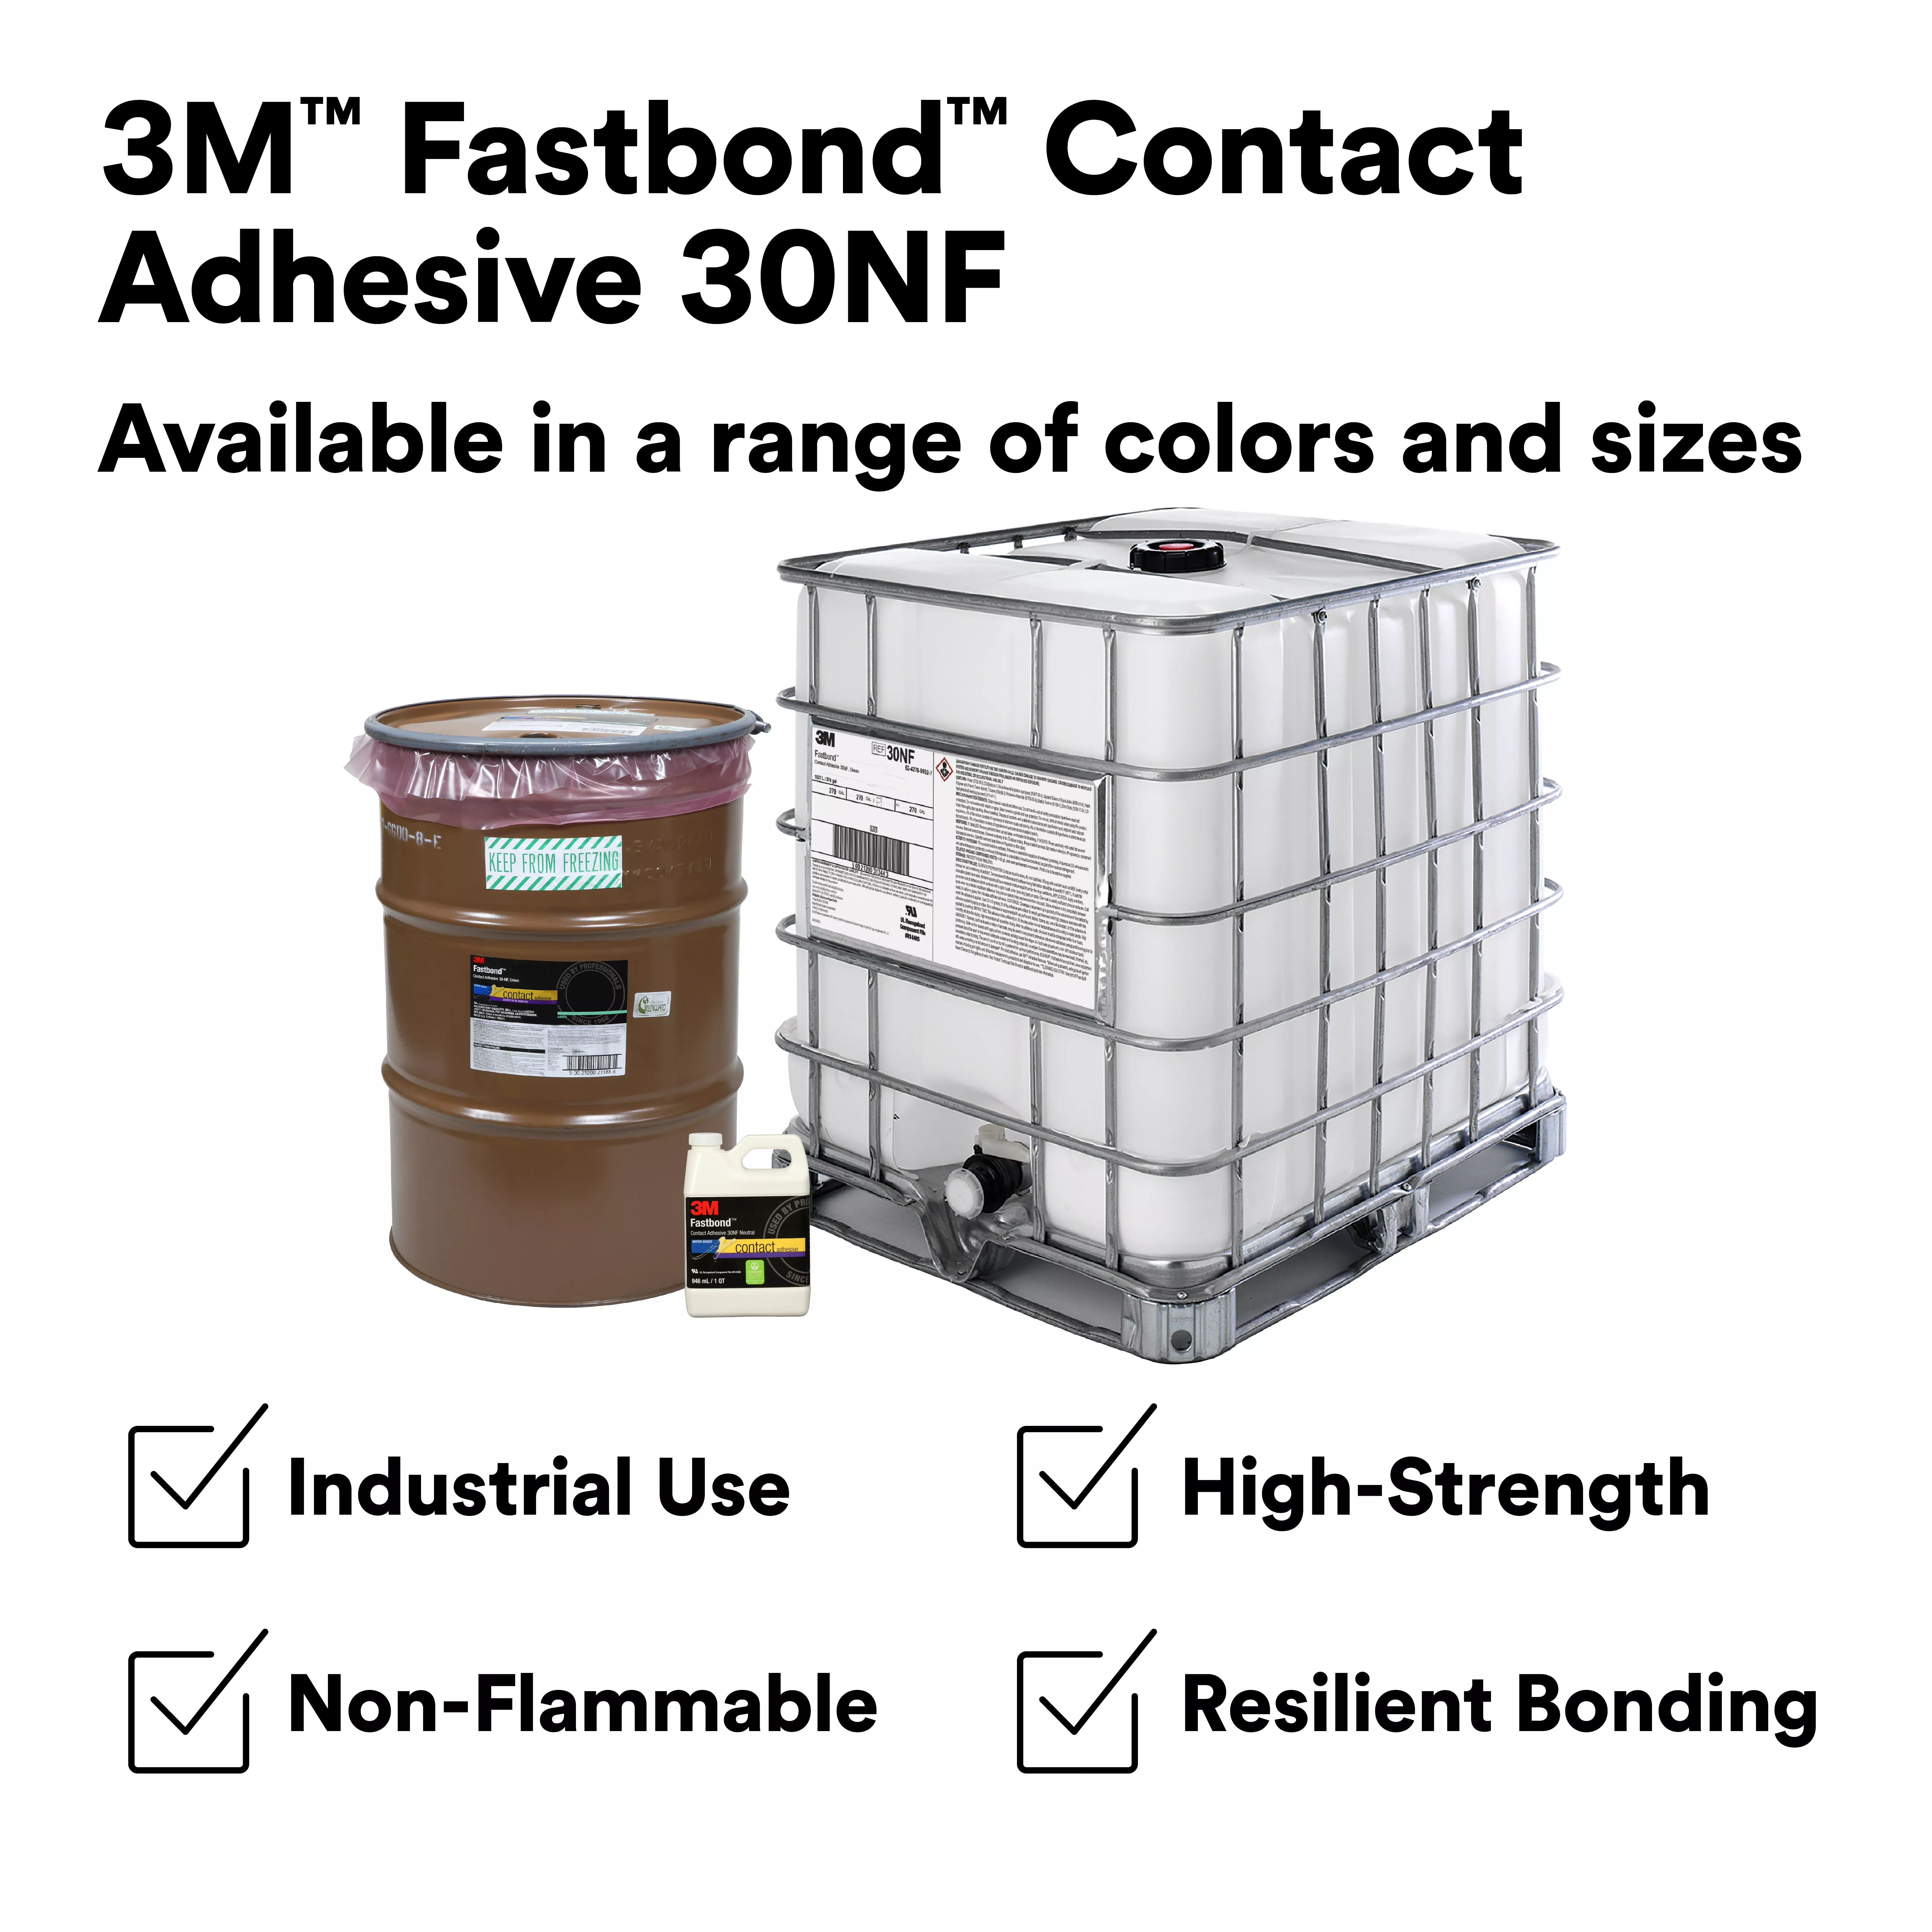 SKU 7000046568 | 3M™ Fastbond™ Contact Adhesive 30NF